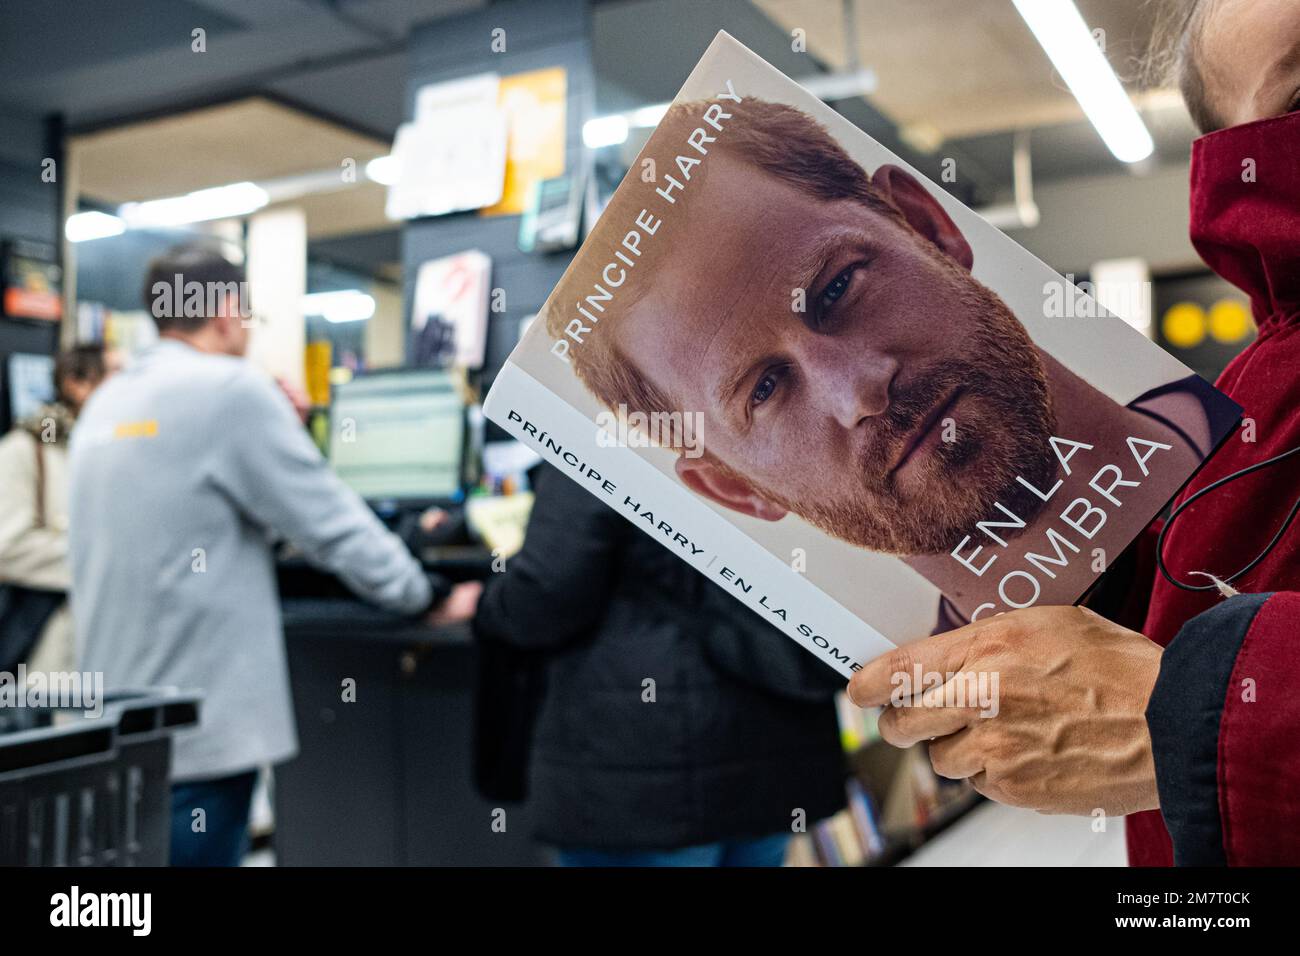 Barcelona, Spain. 10th Jan, 2023. A woman is seen holding the spanish edition of Prince Harry's memoir book, entitled "En la Sombra", original title "Spare", inside an "Abacus" bookstore in the city center. Credit: SOPA Images Limited/Alamy Live News Stock Photo